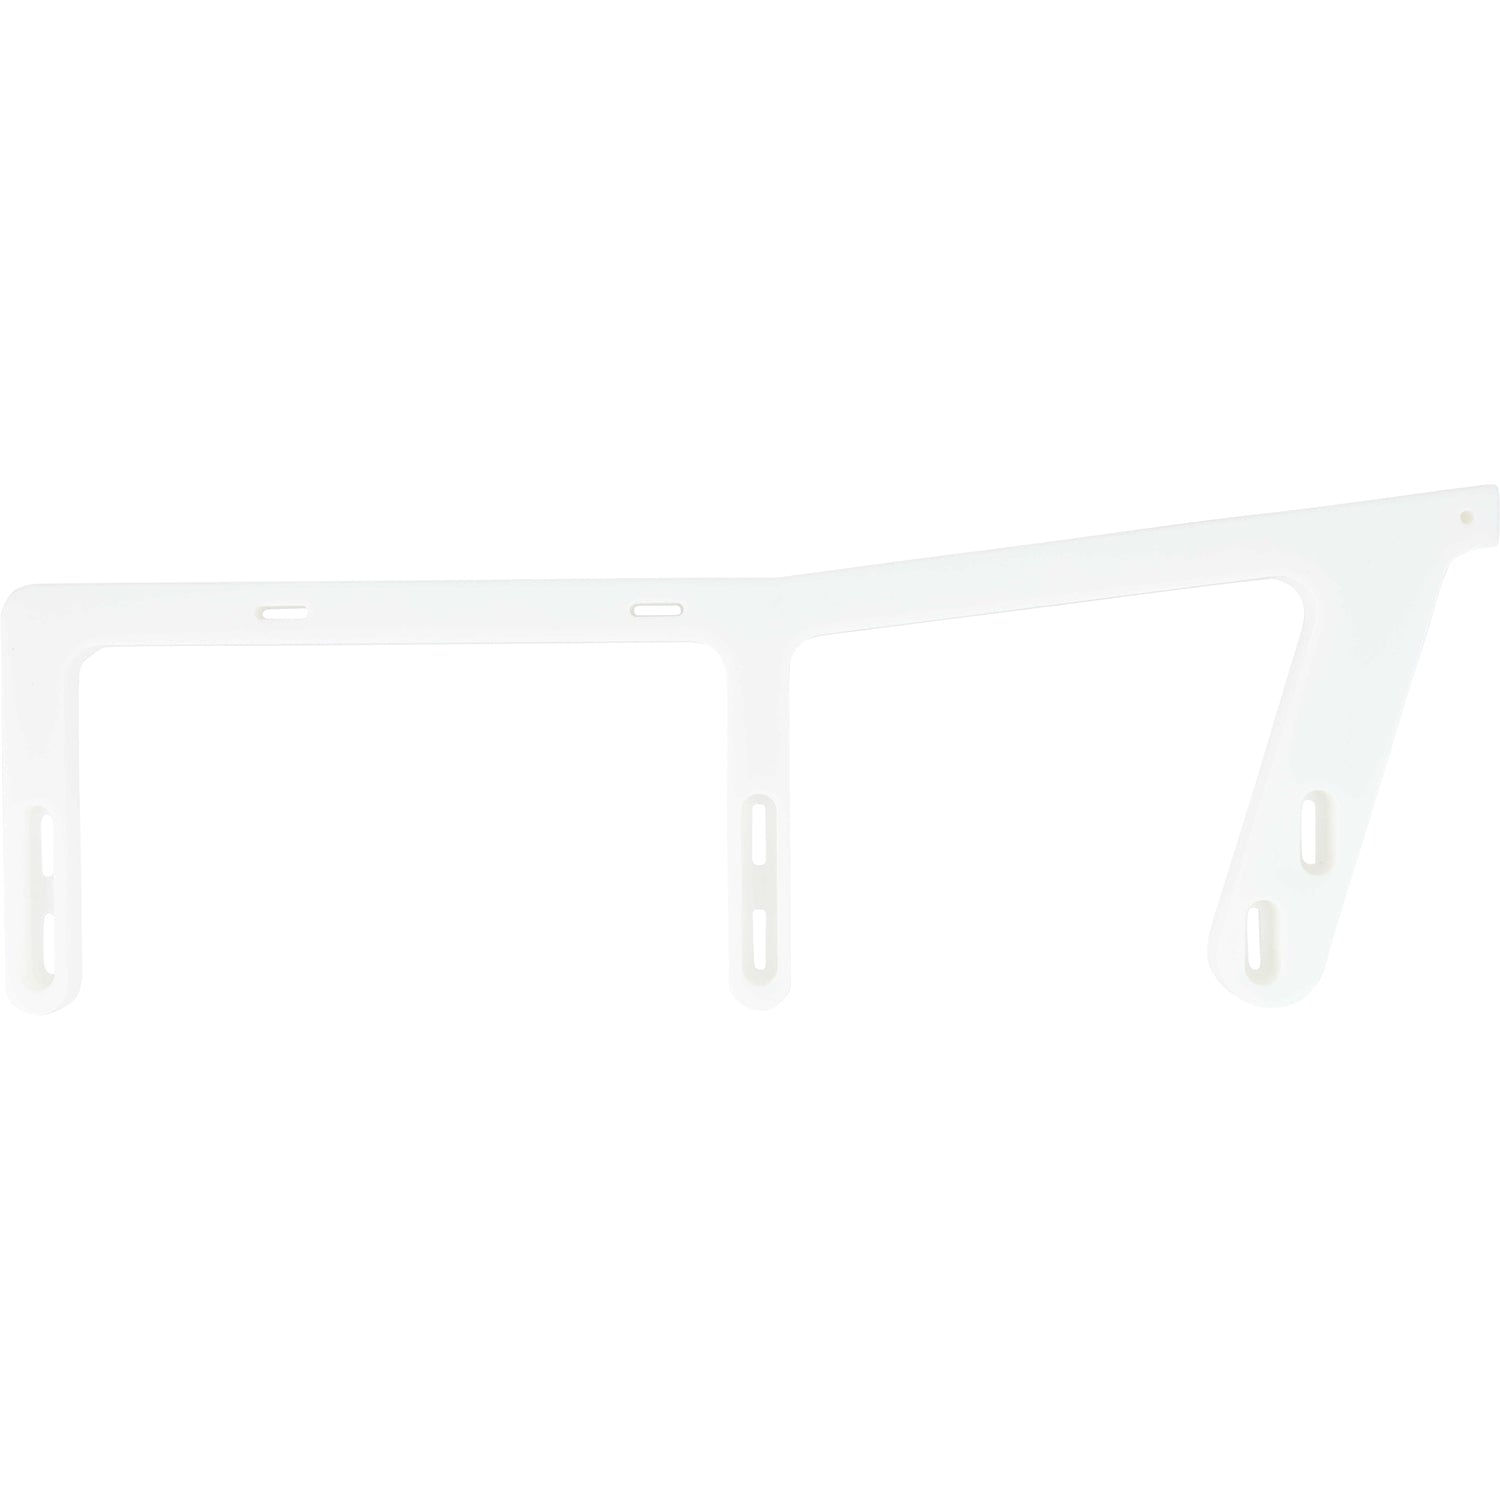 Machined white HDPE rail with three posts and holes used for mounting. Shown on white background.